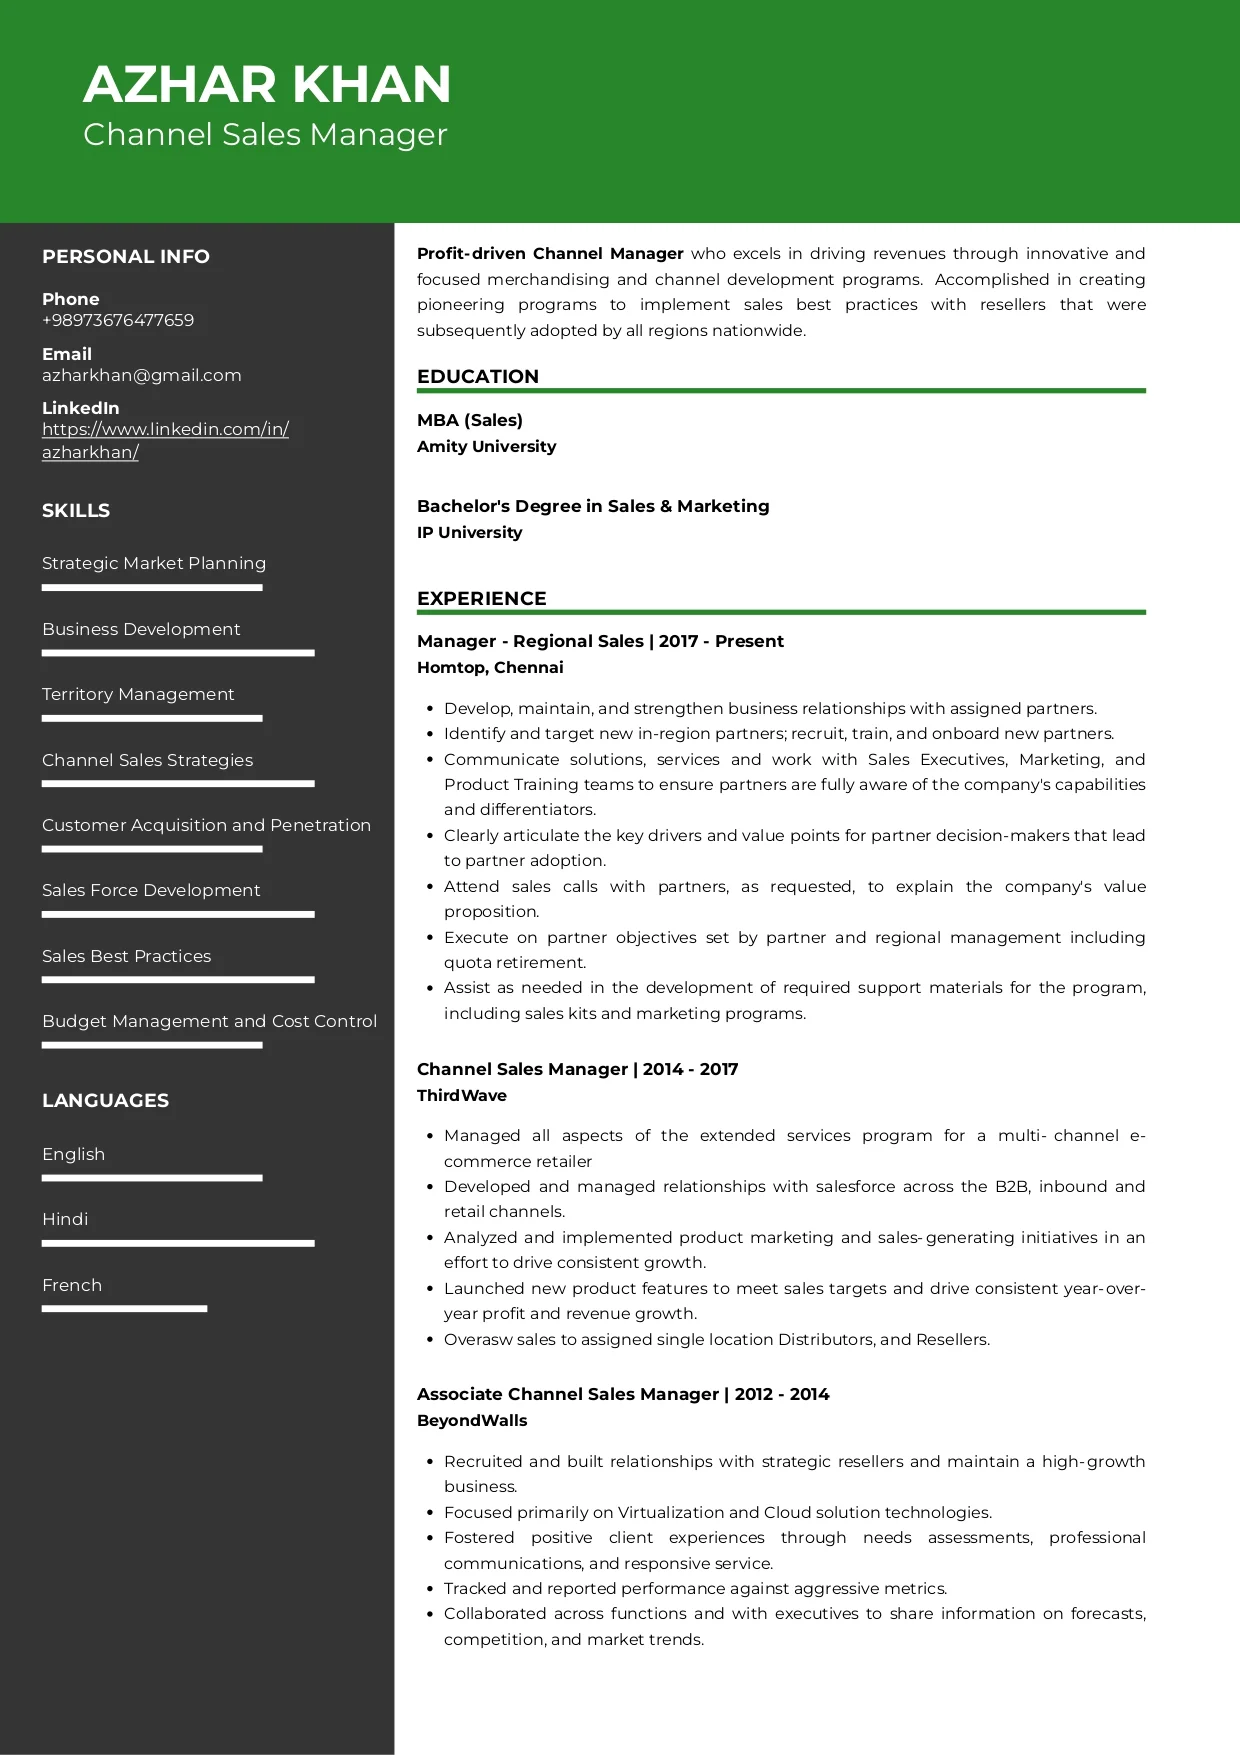 Best Free Resume Templates | ATS optimised Resume Templates | Free Download on Resumod.co